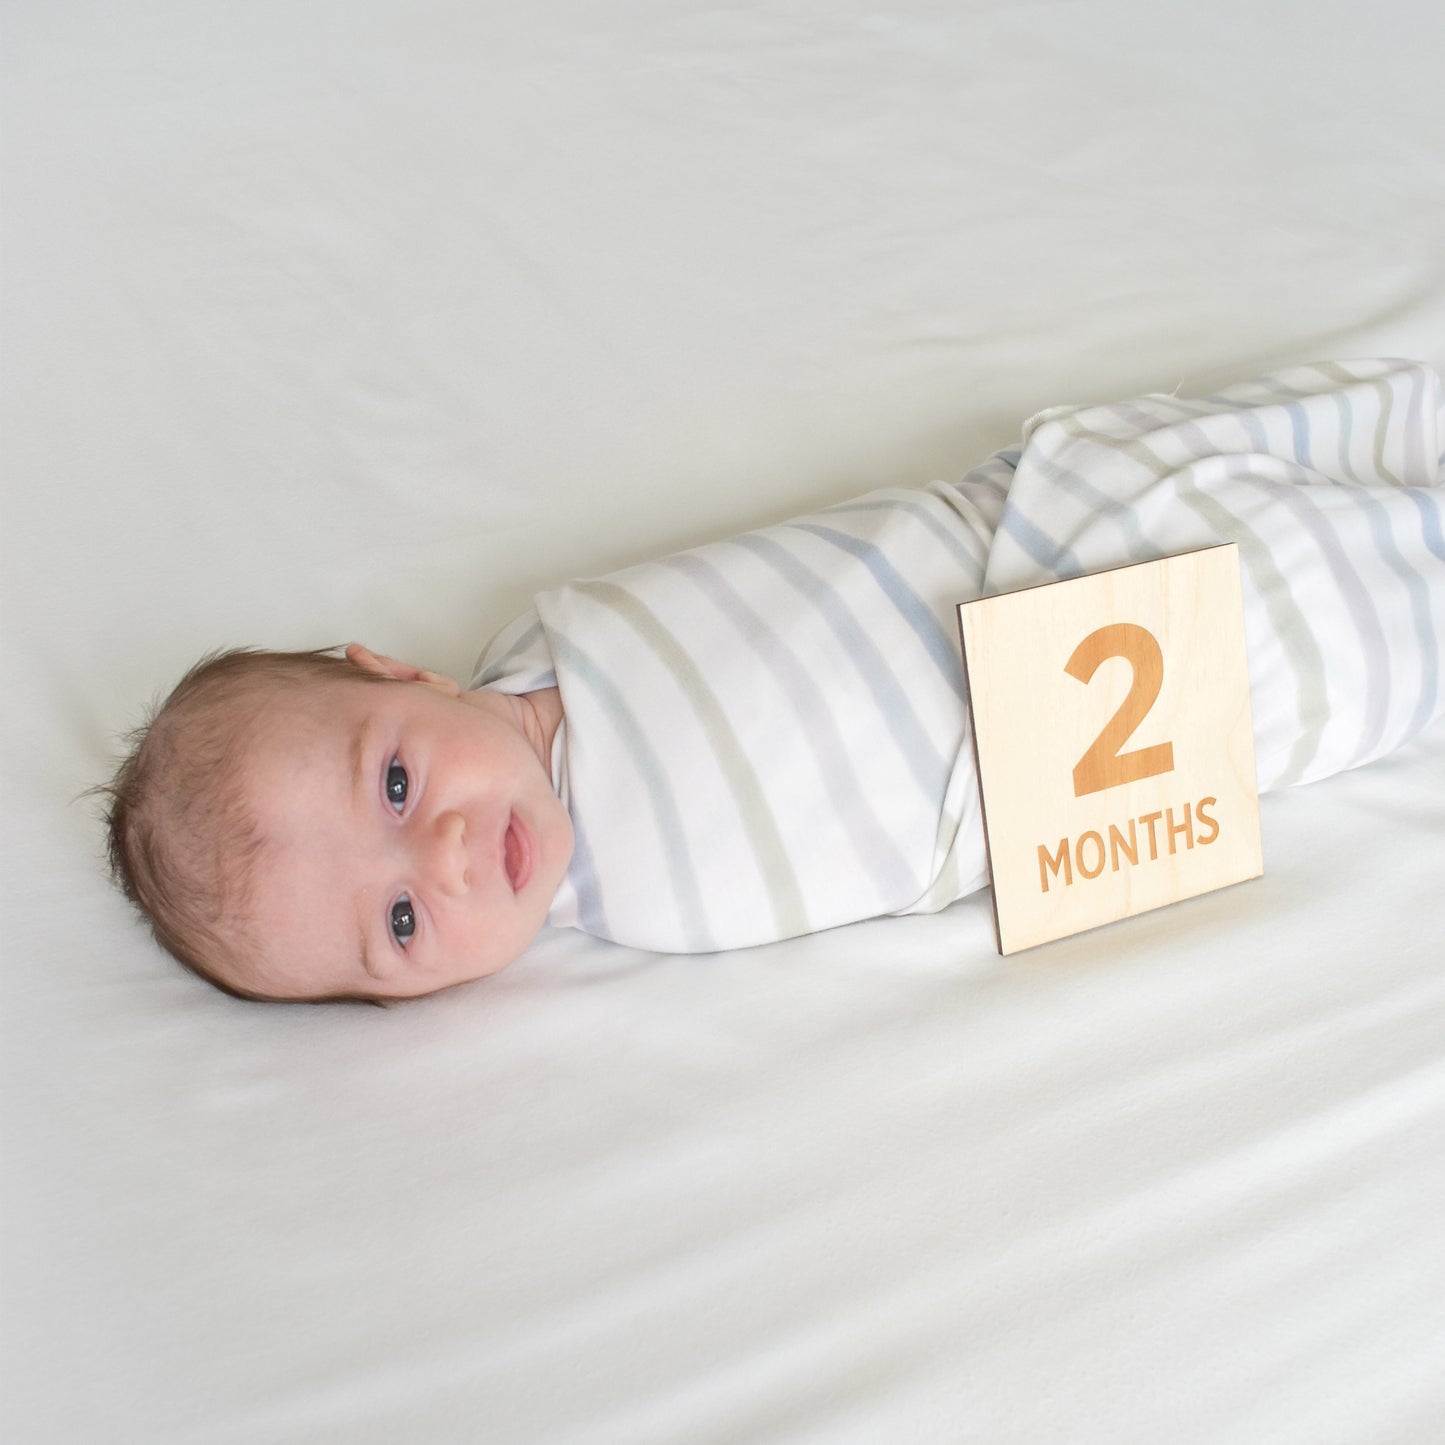 baby with blanket and two month old milestone sign